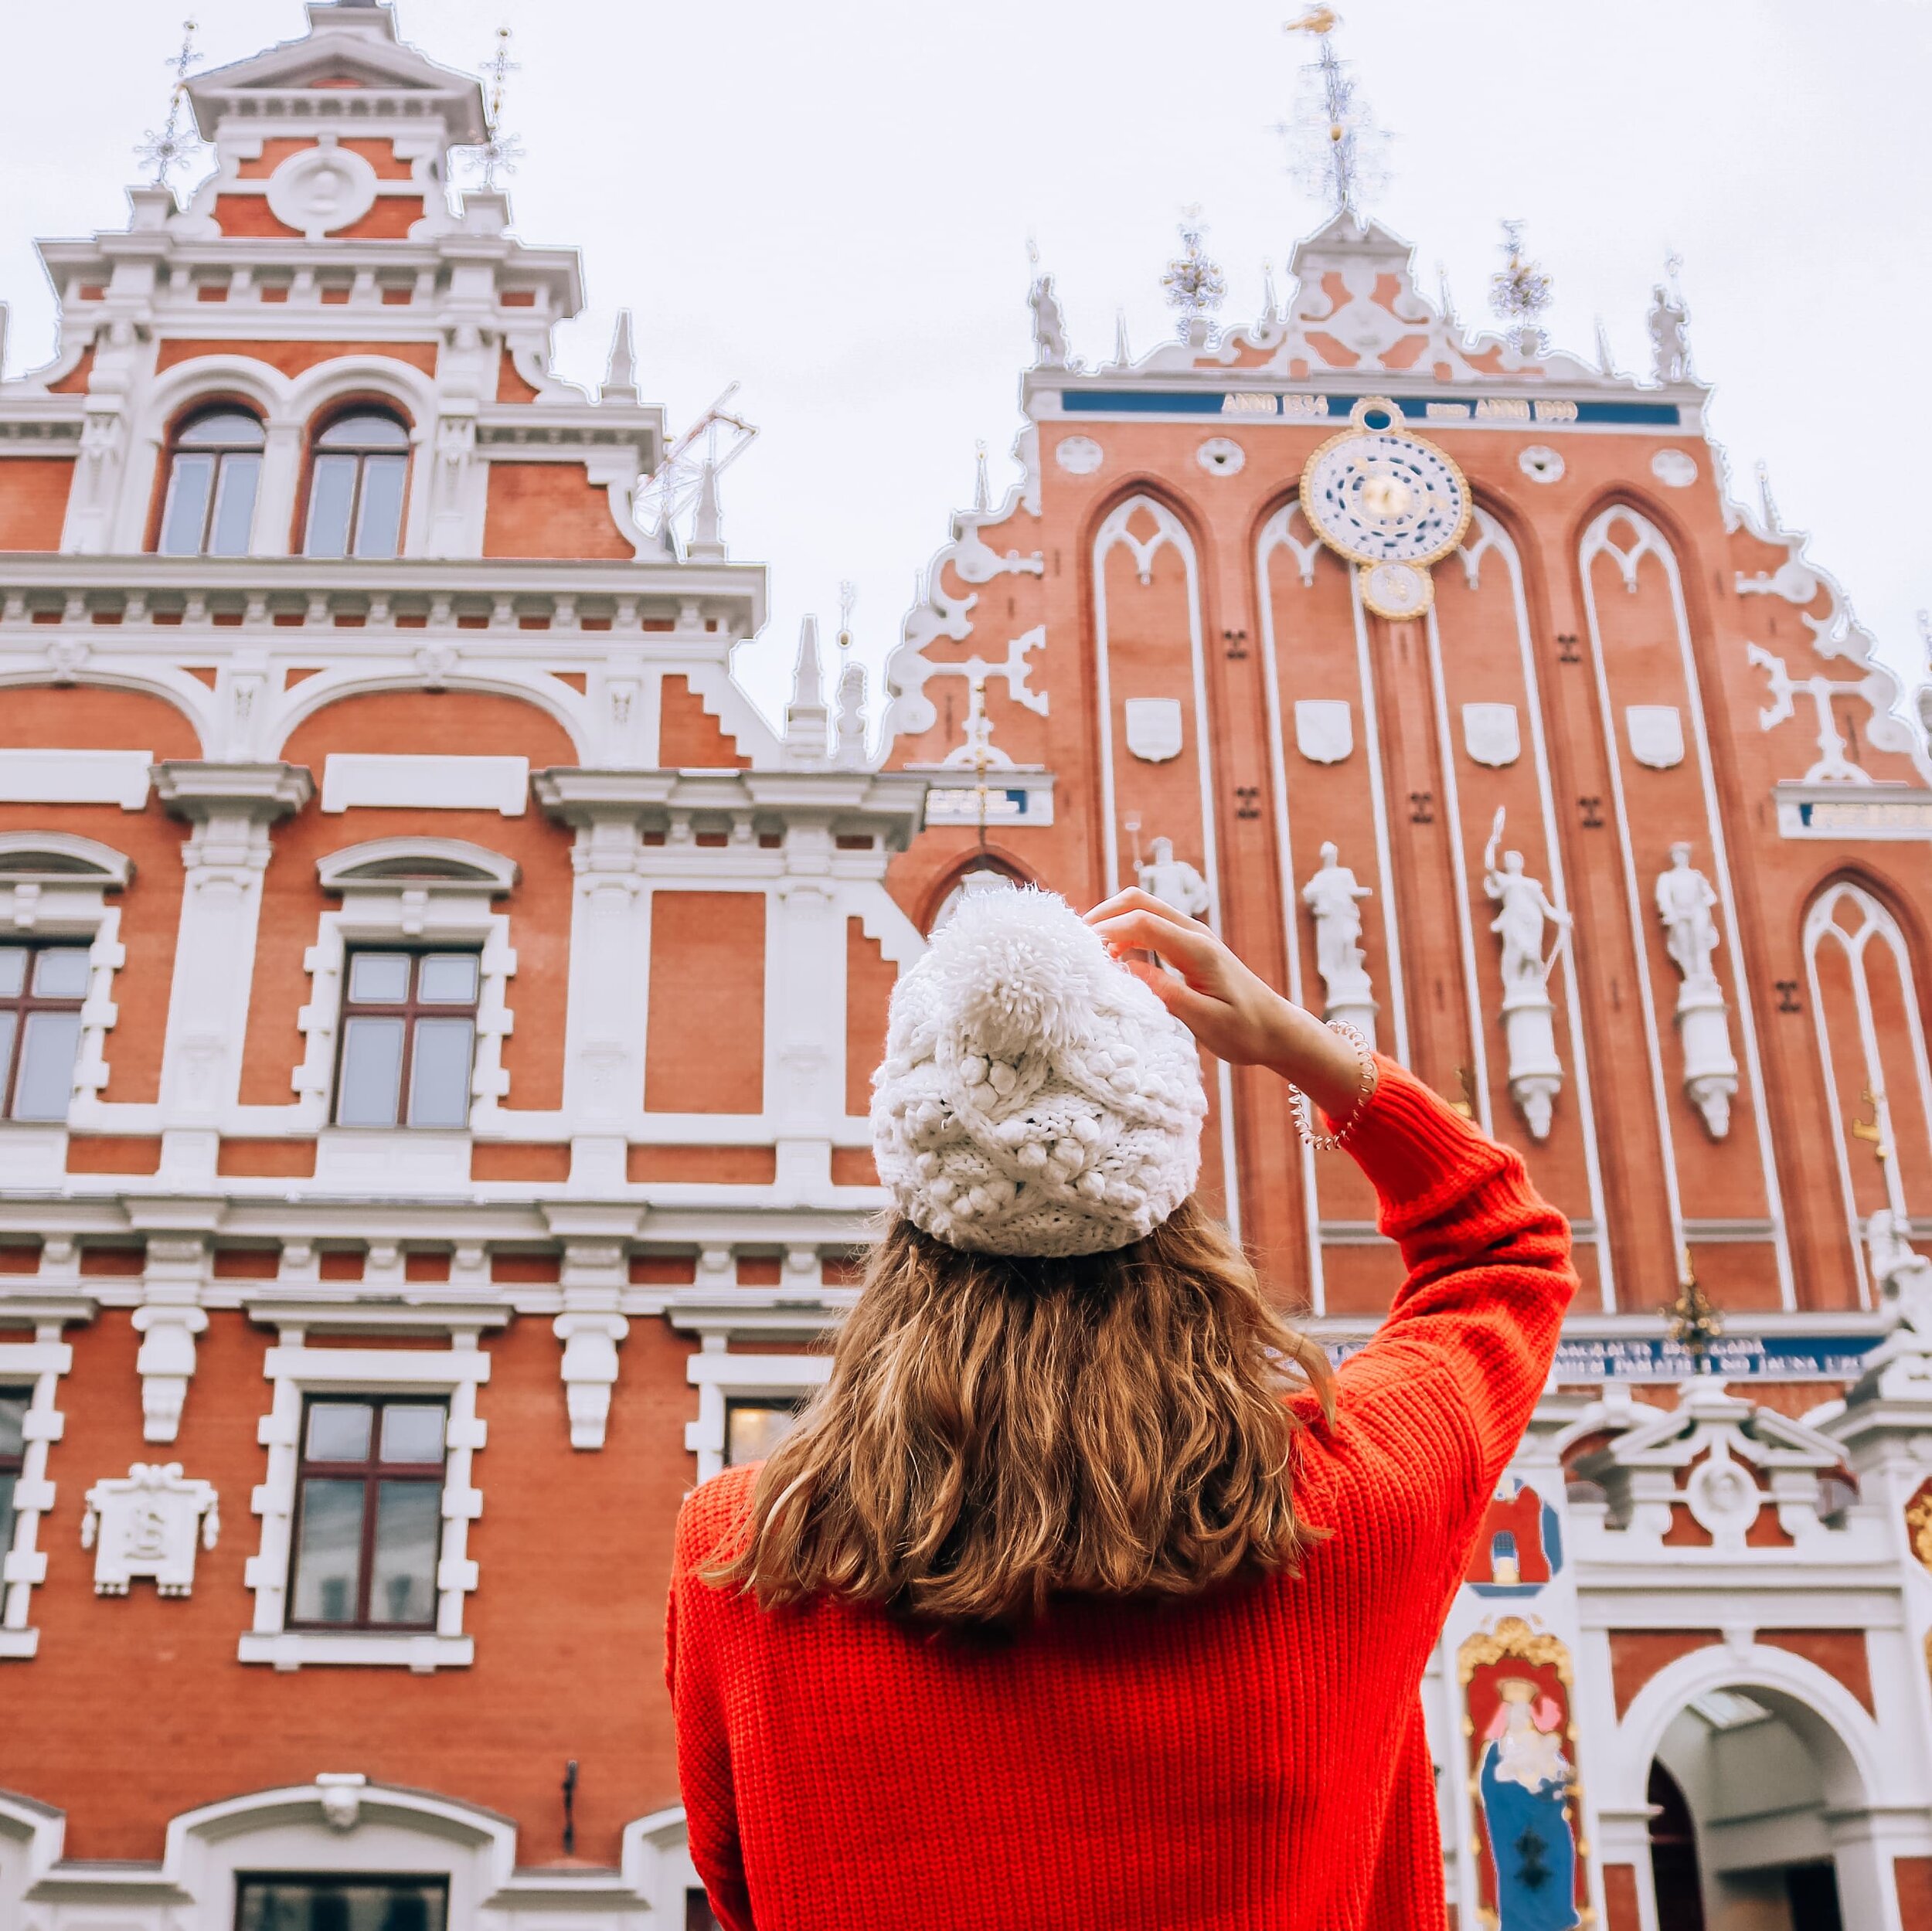 Riga Instagram Locations - the 12 most instagrammable places in Riga, Latvia for your next trip to this beautiful Baltic state| Helena Bradbury travel blog | riga street photography | riga photography | riga latvia old town | riga best photo spots |…